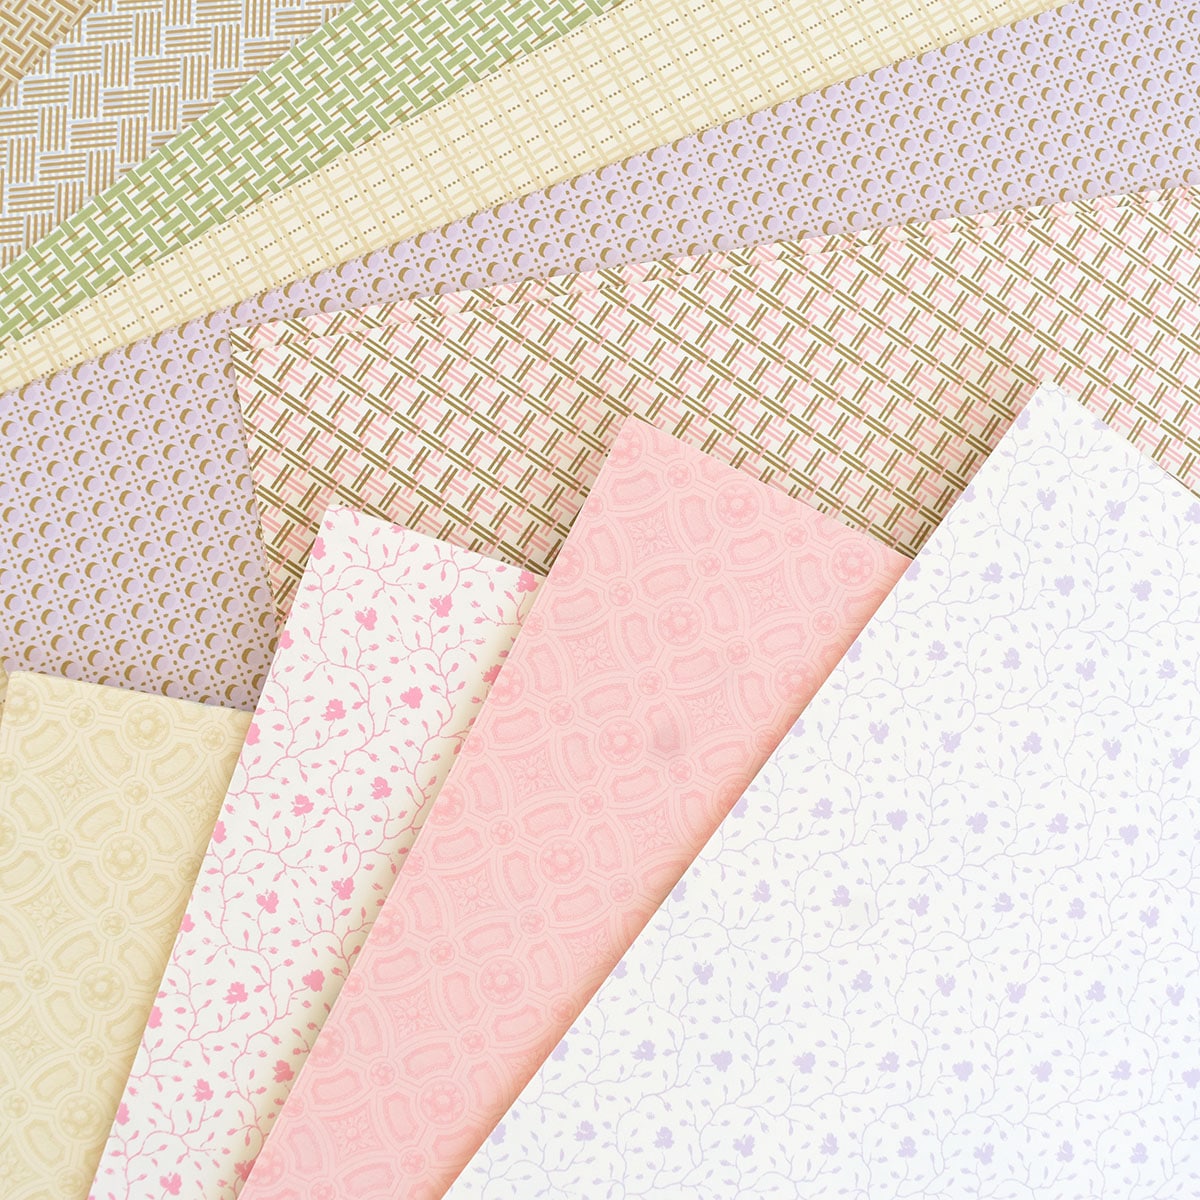 a close up of many different colored papers.